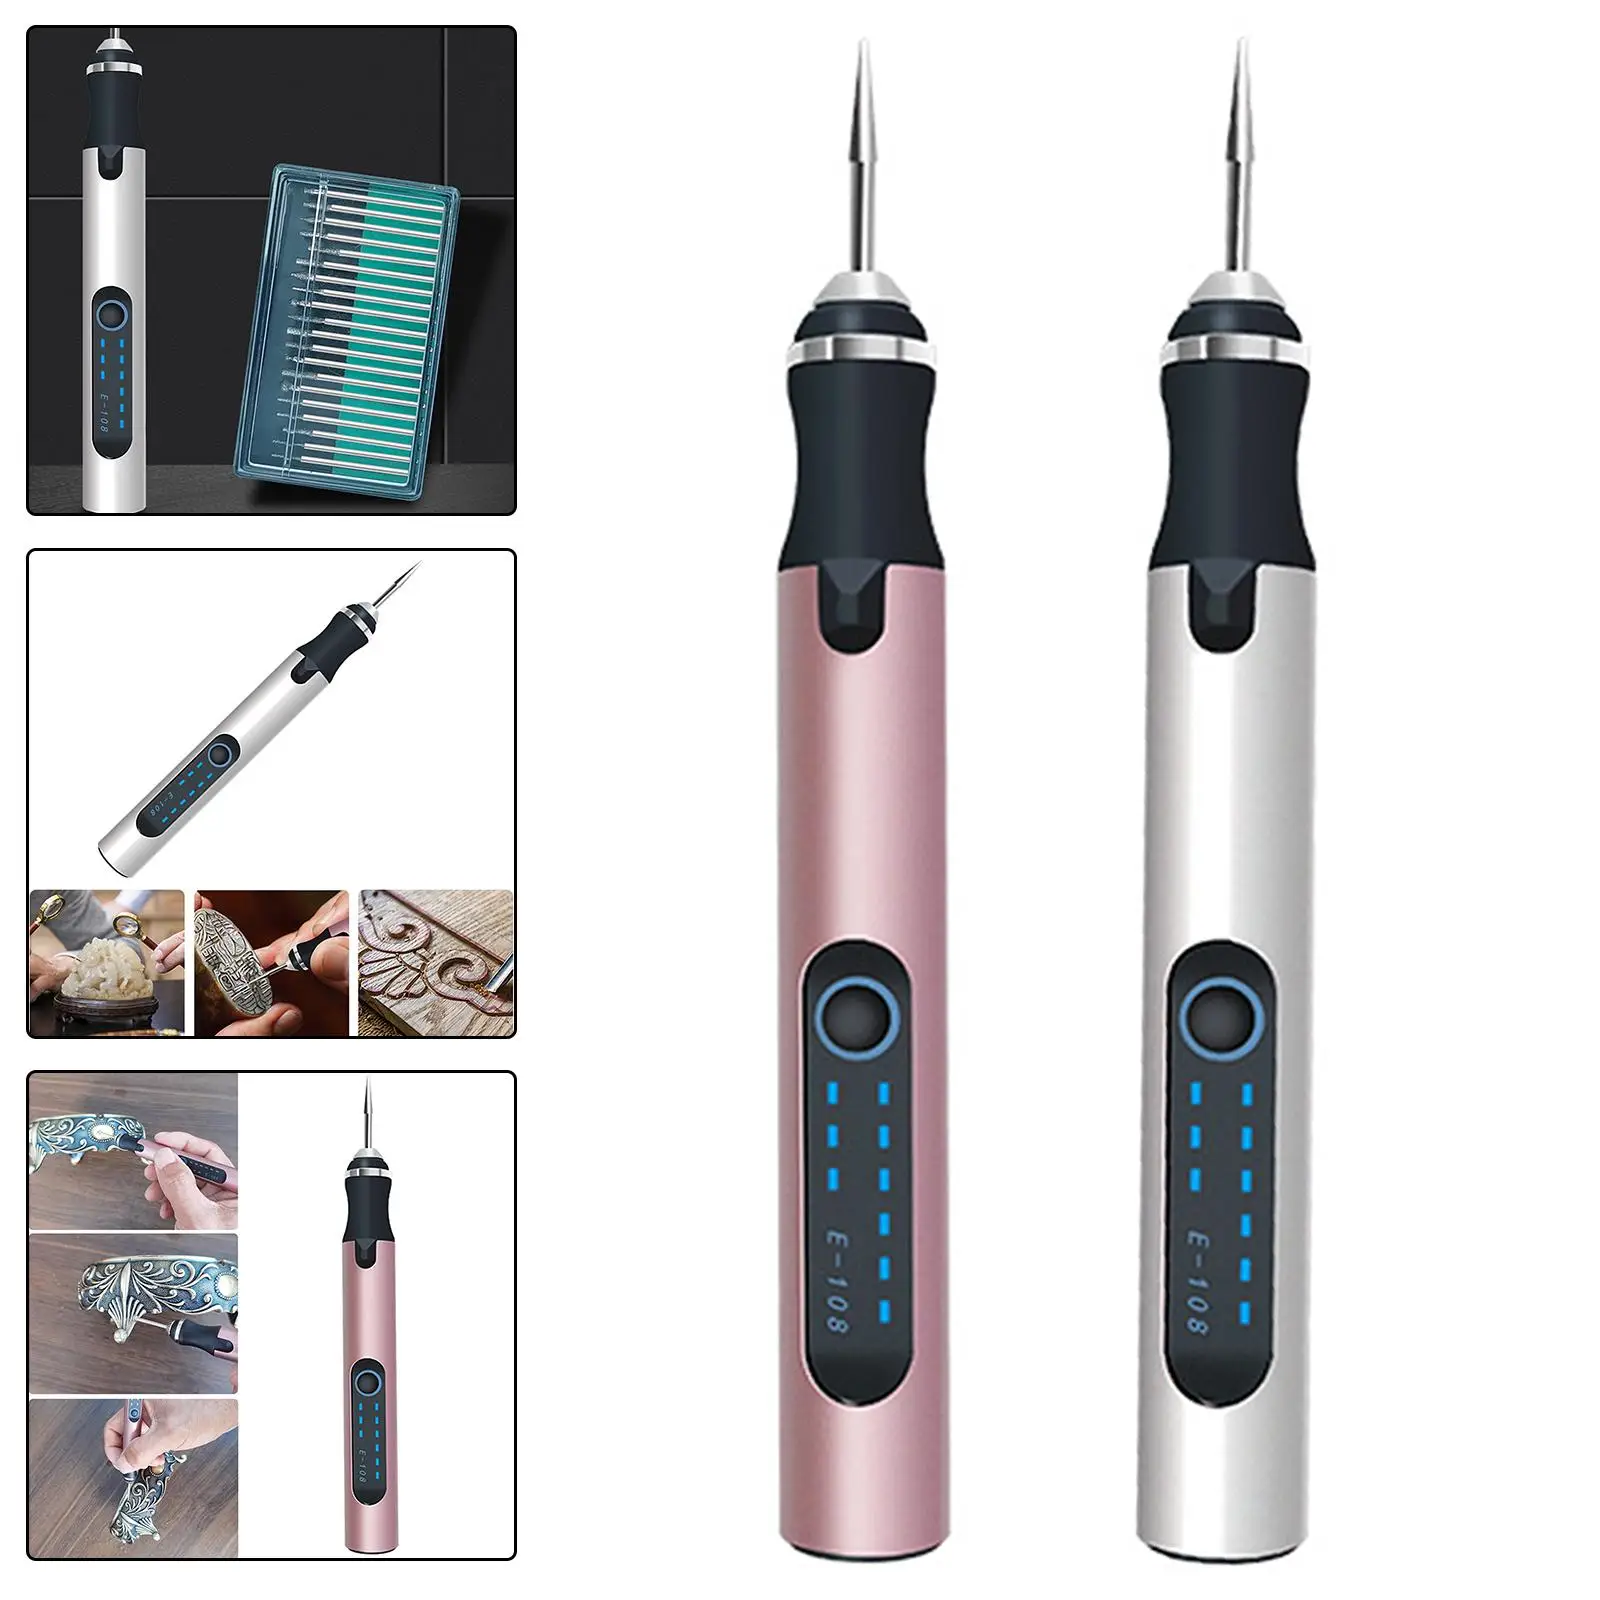 Mini Electric Grinder Drill Bit Pen Manicure Pen Polisher Sander 3-Speed USB Rechargeable Mini Grinder Drill Pen for Woodworking